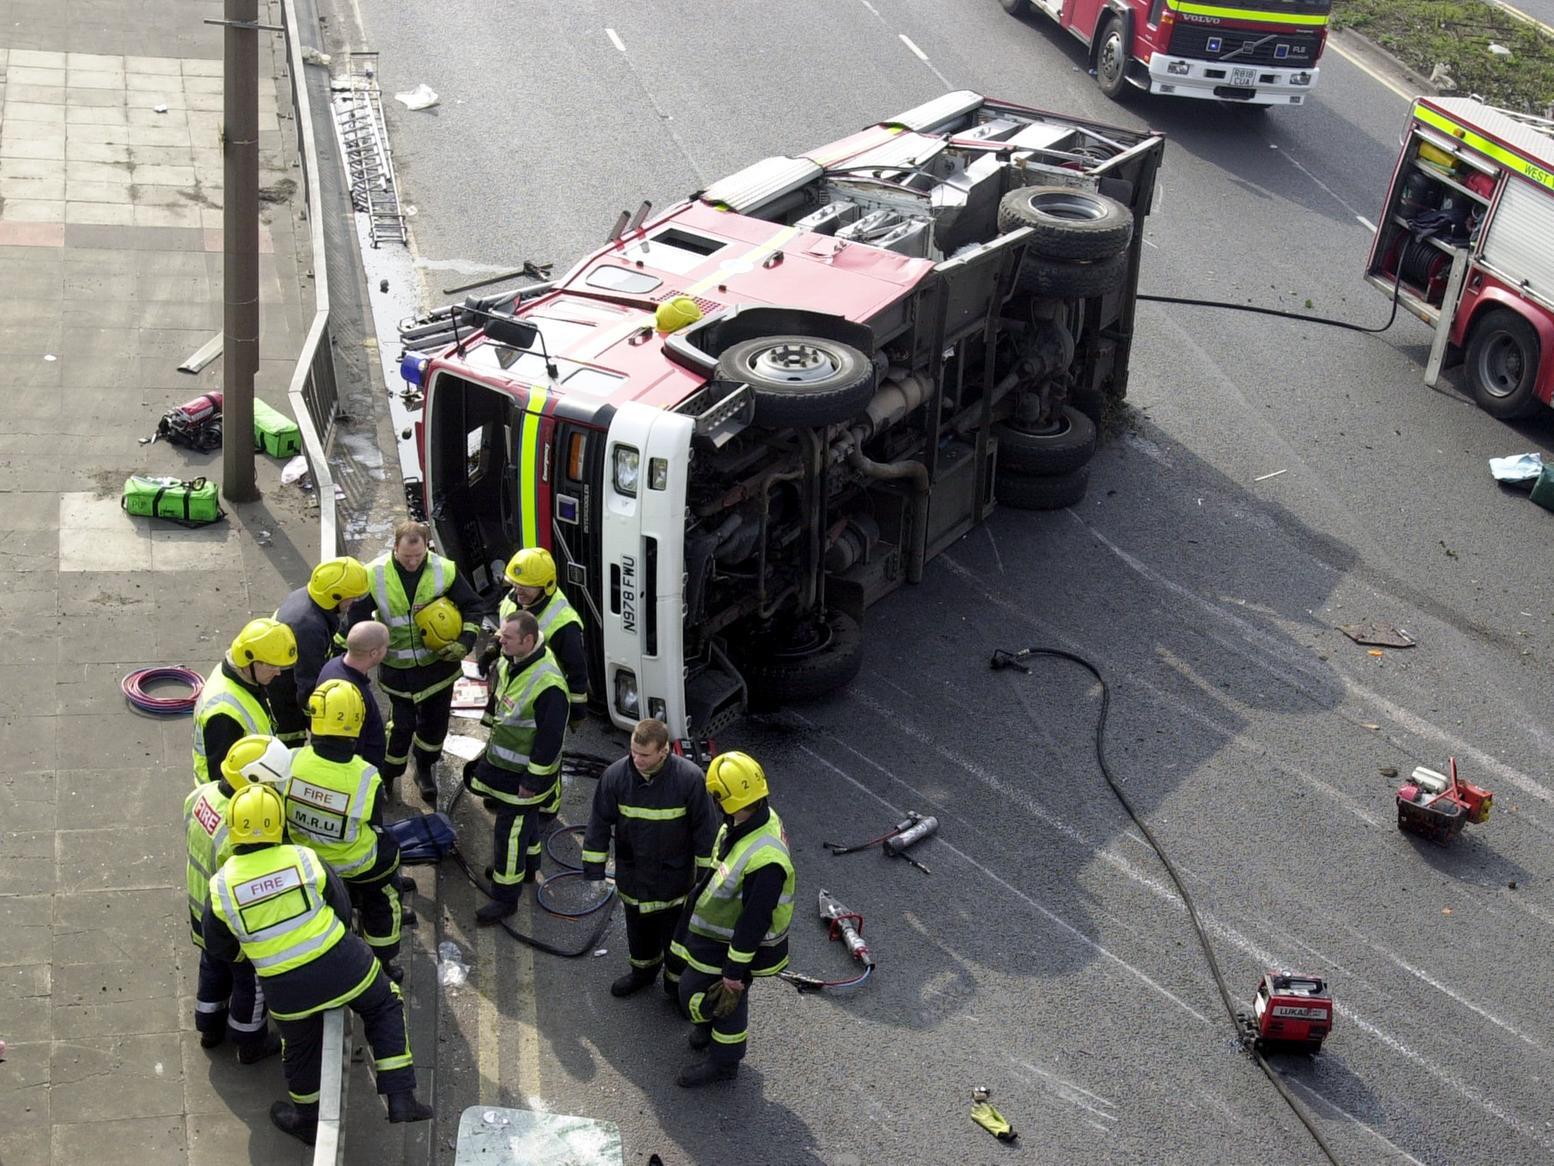 This was the scene after a fire engine overturned on Hunslet Road.